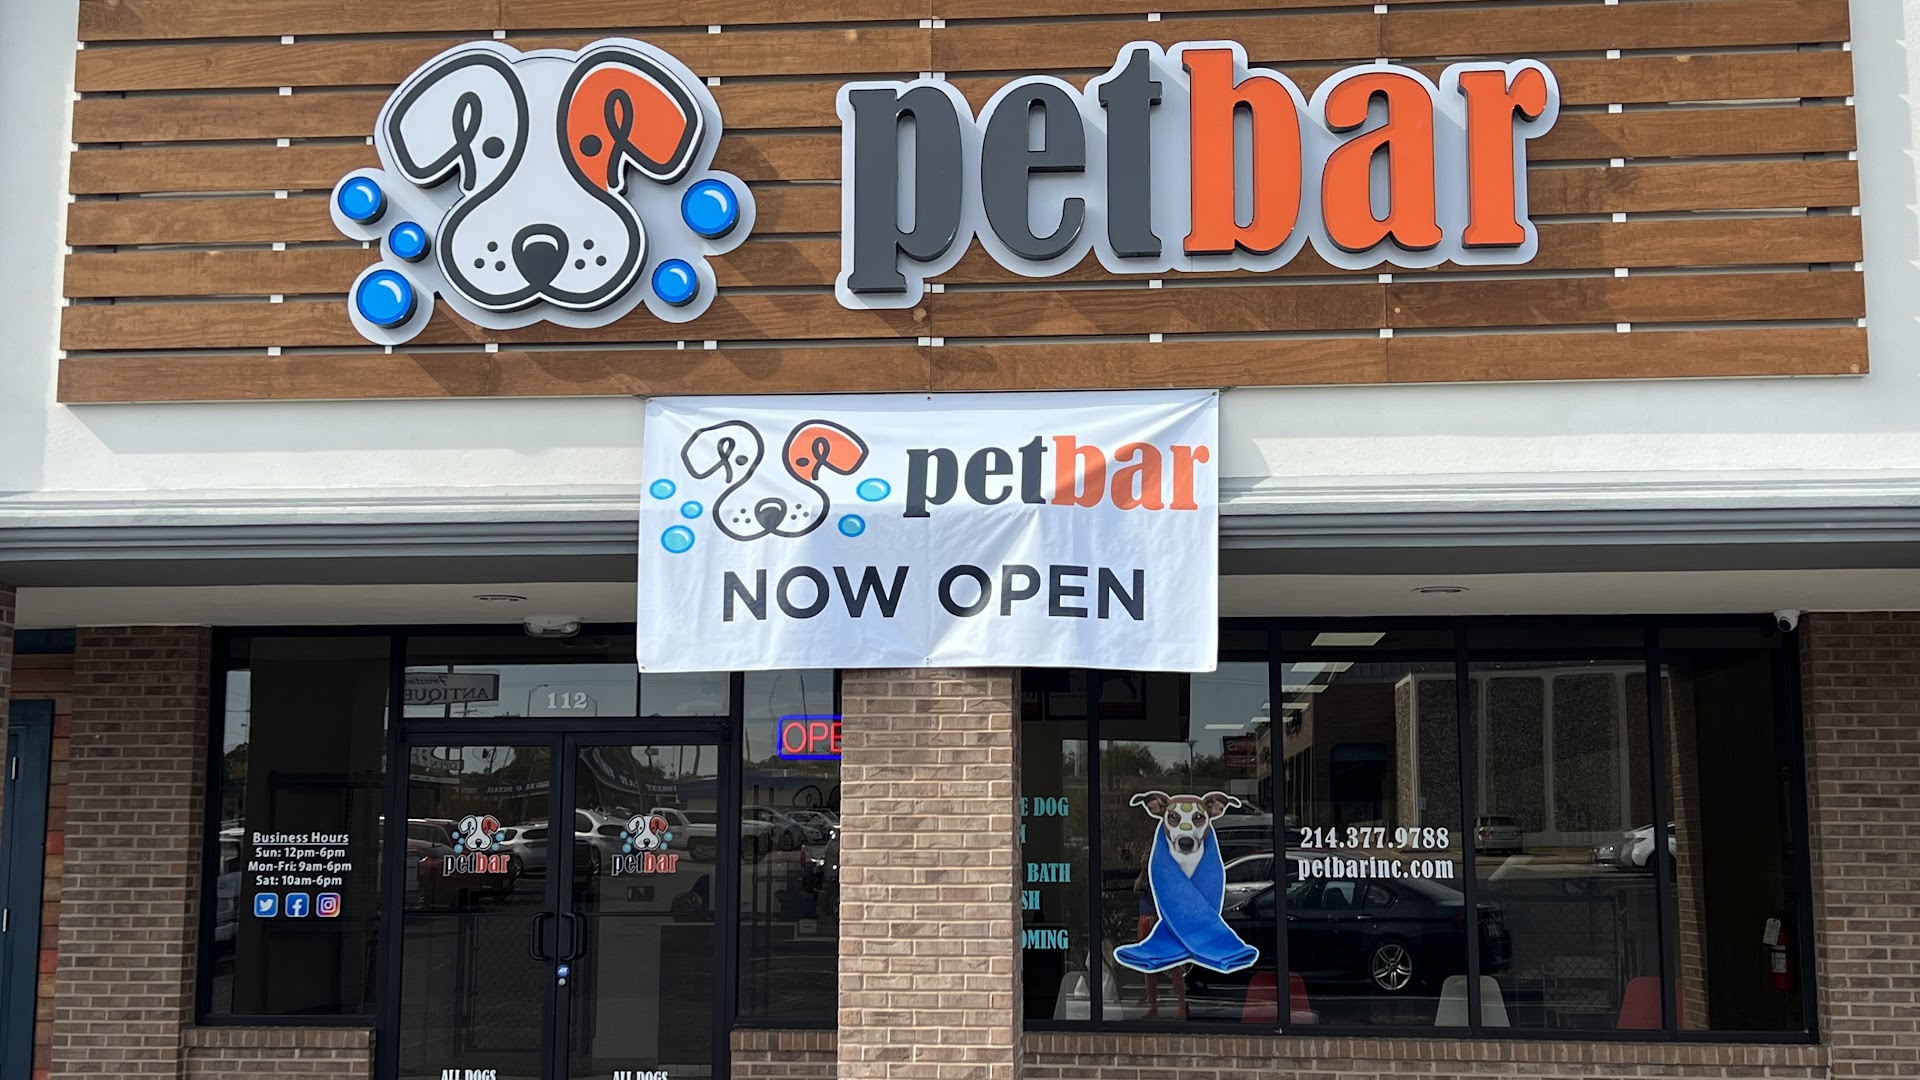 petbar Dallas - Inwood Forest